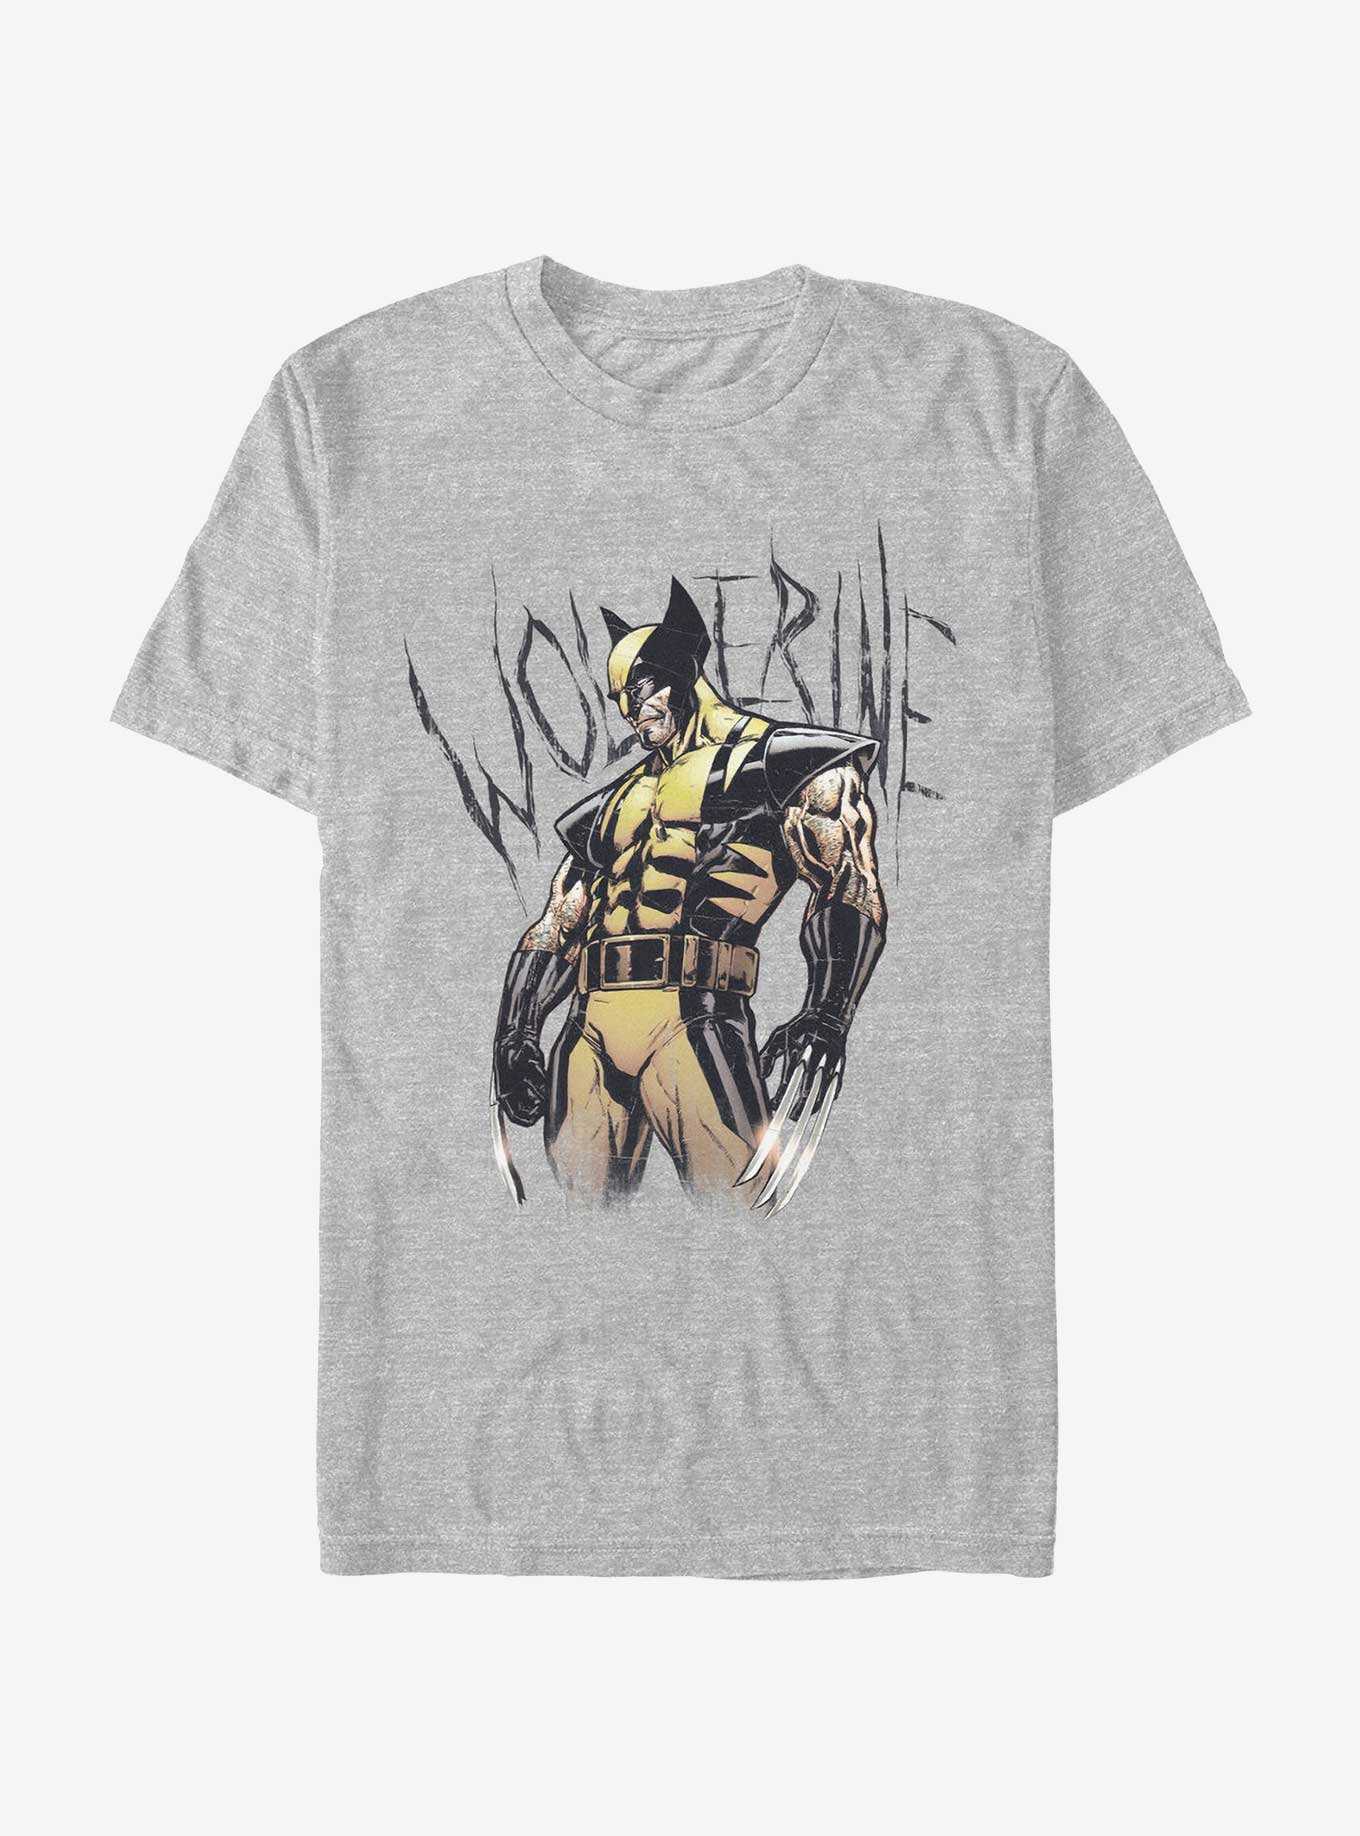 Wolverine Claws Ready T-Shirt, , hi-res